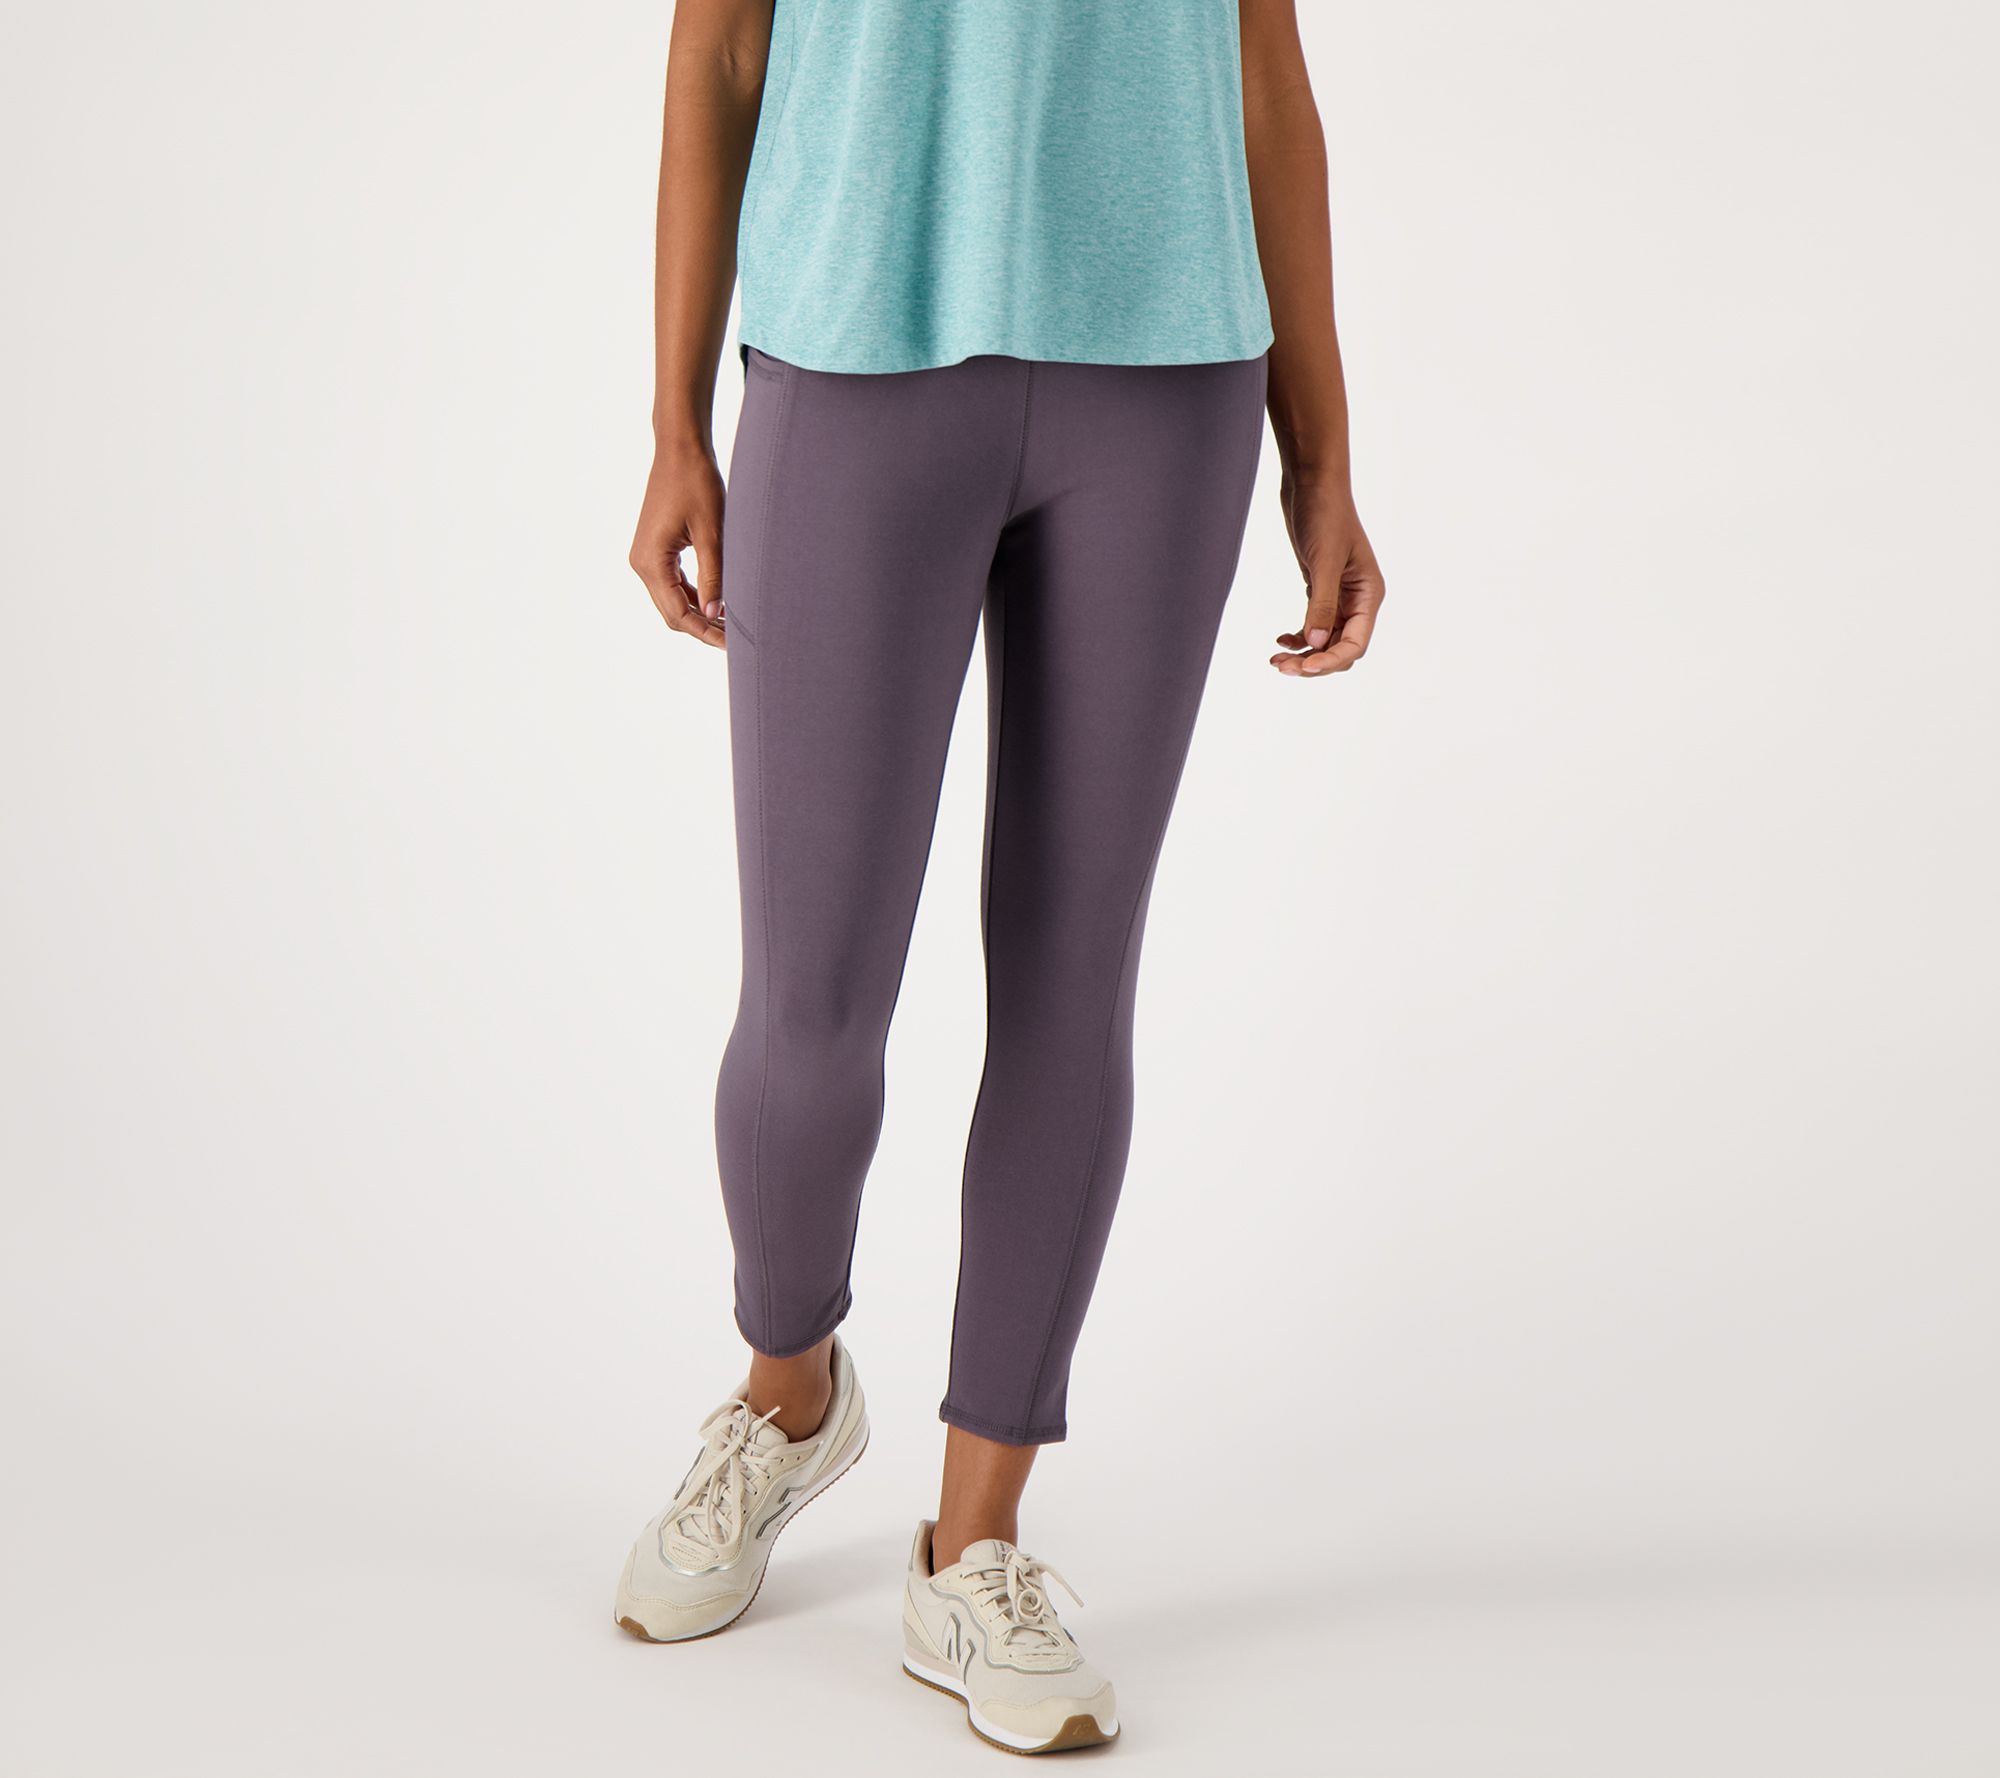 Fashion Look Featuring Lululemon Activewear Pants and Rebecca